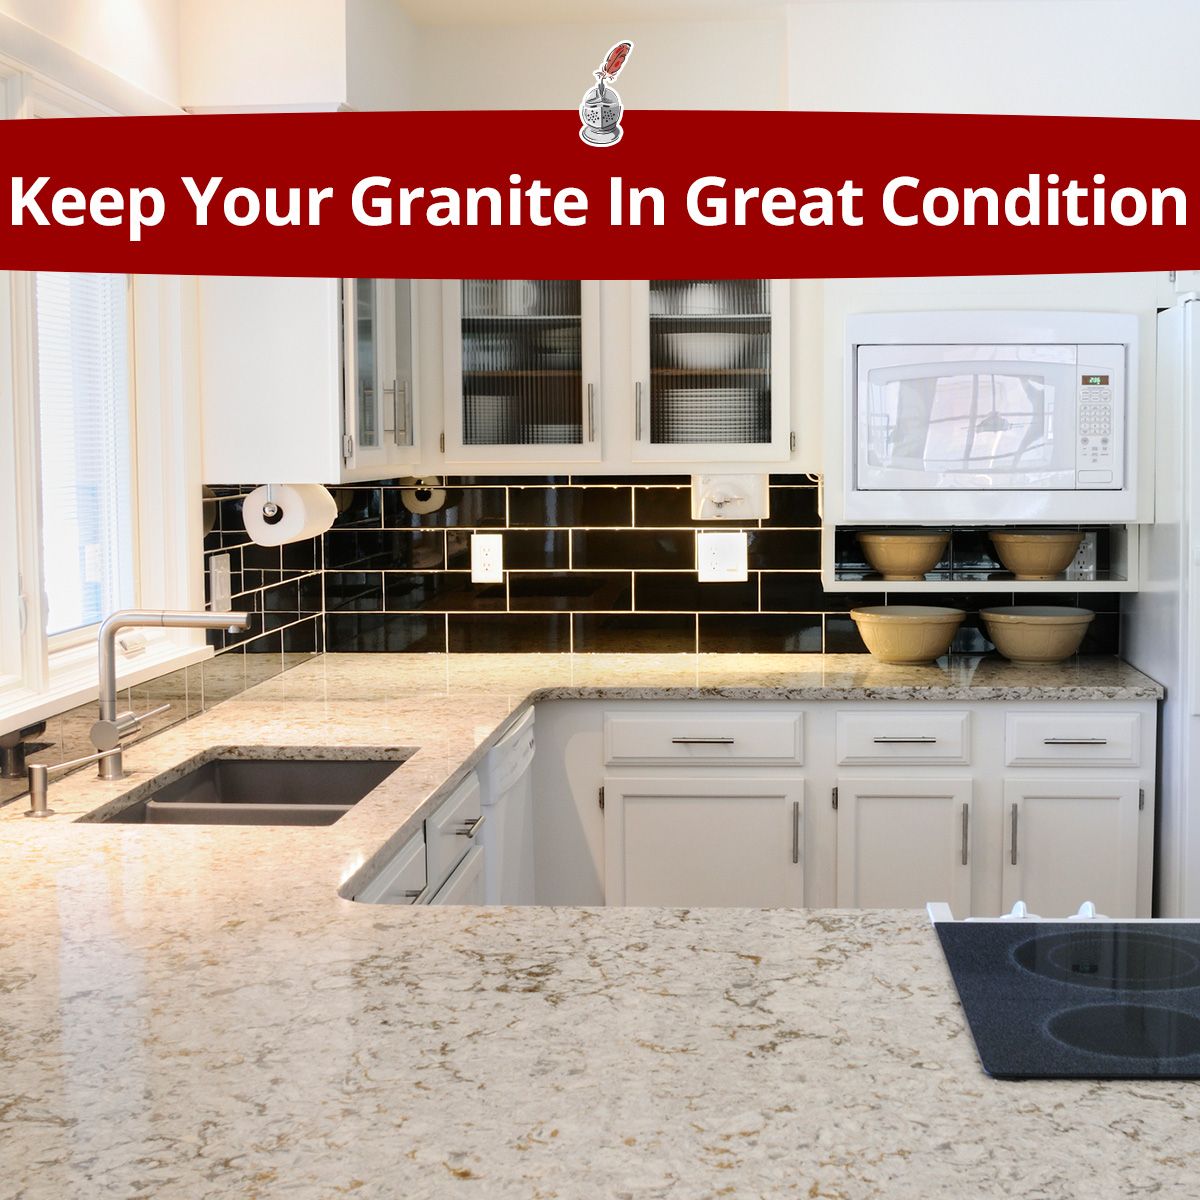 Keep Your Granite In Great Condition